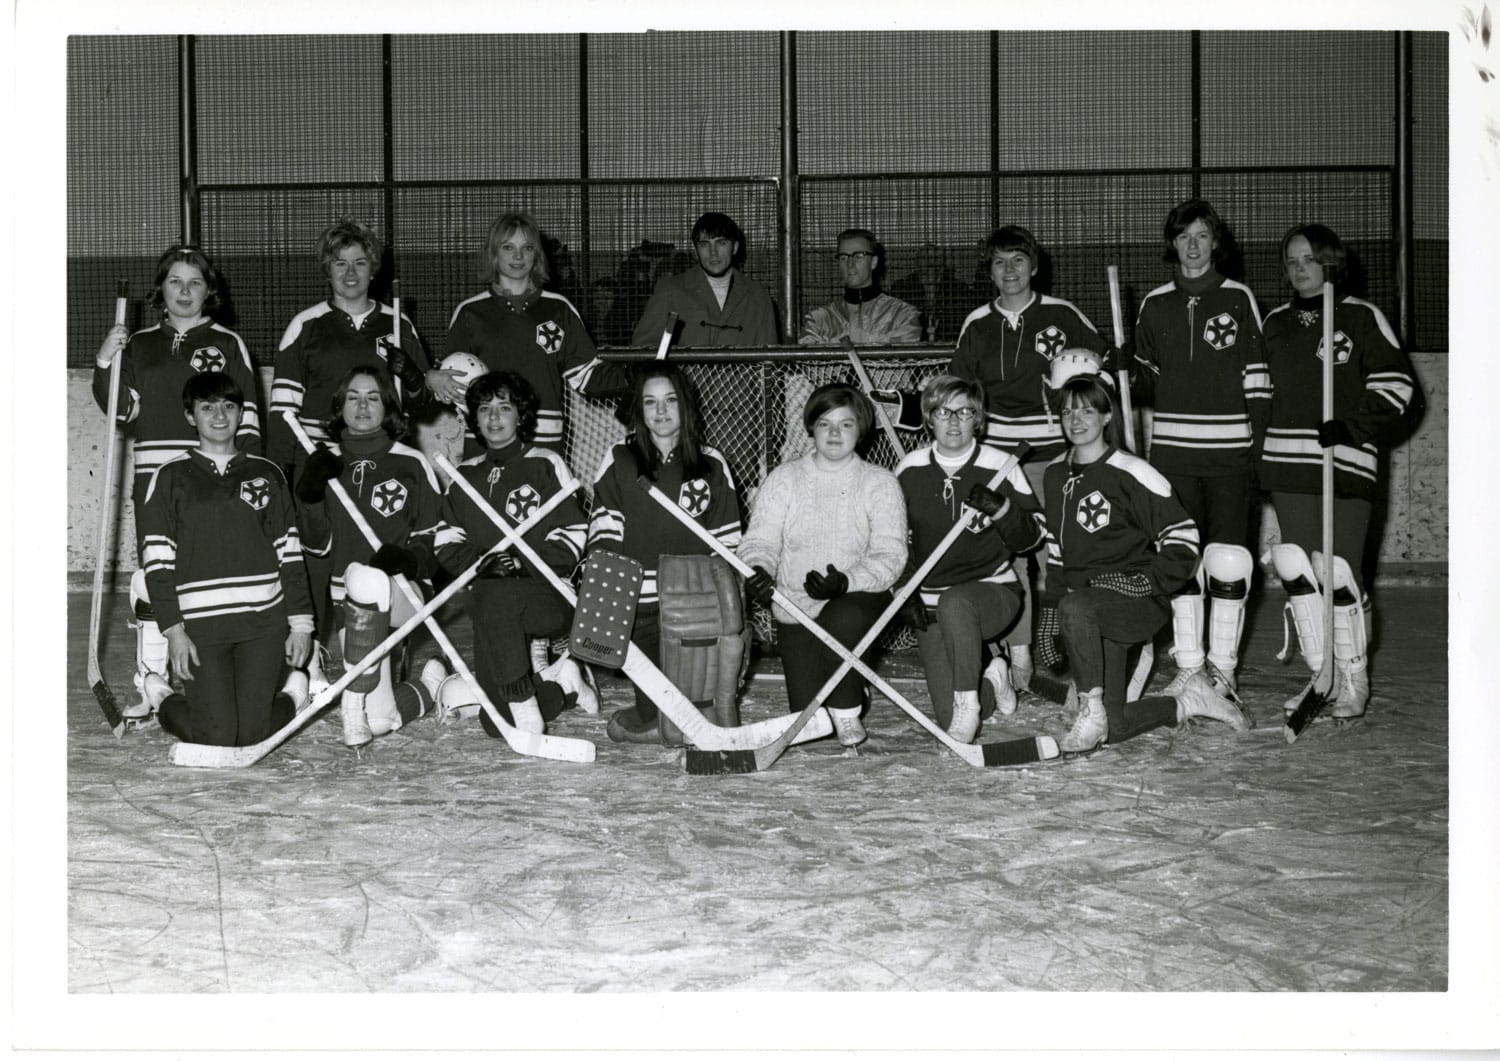 In an old photo from the 1960s, a women's hockey team poses in uniform on an ice rink.